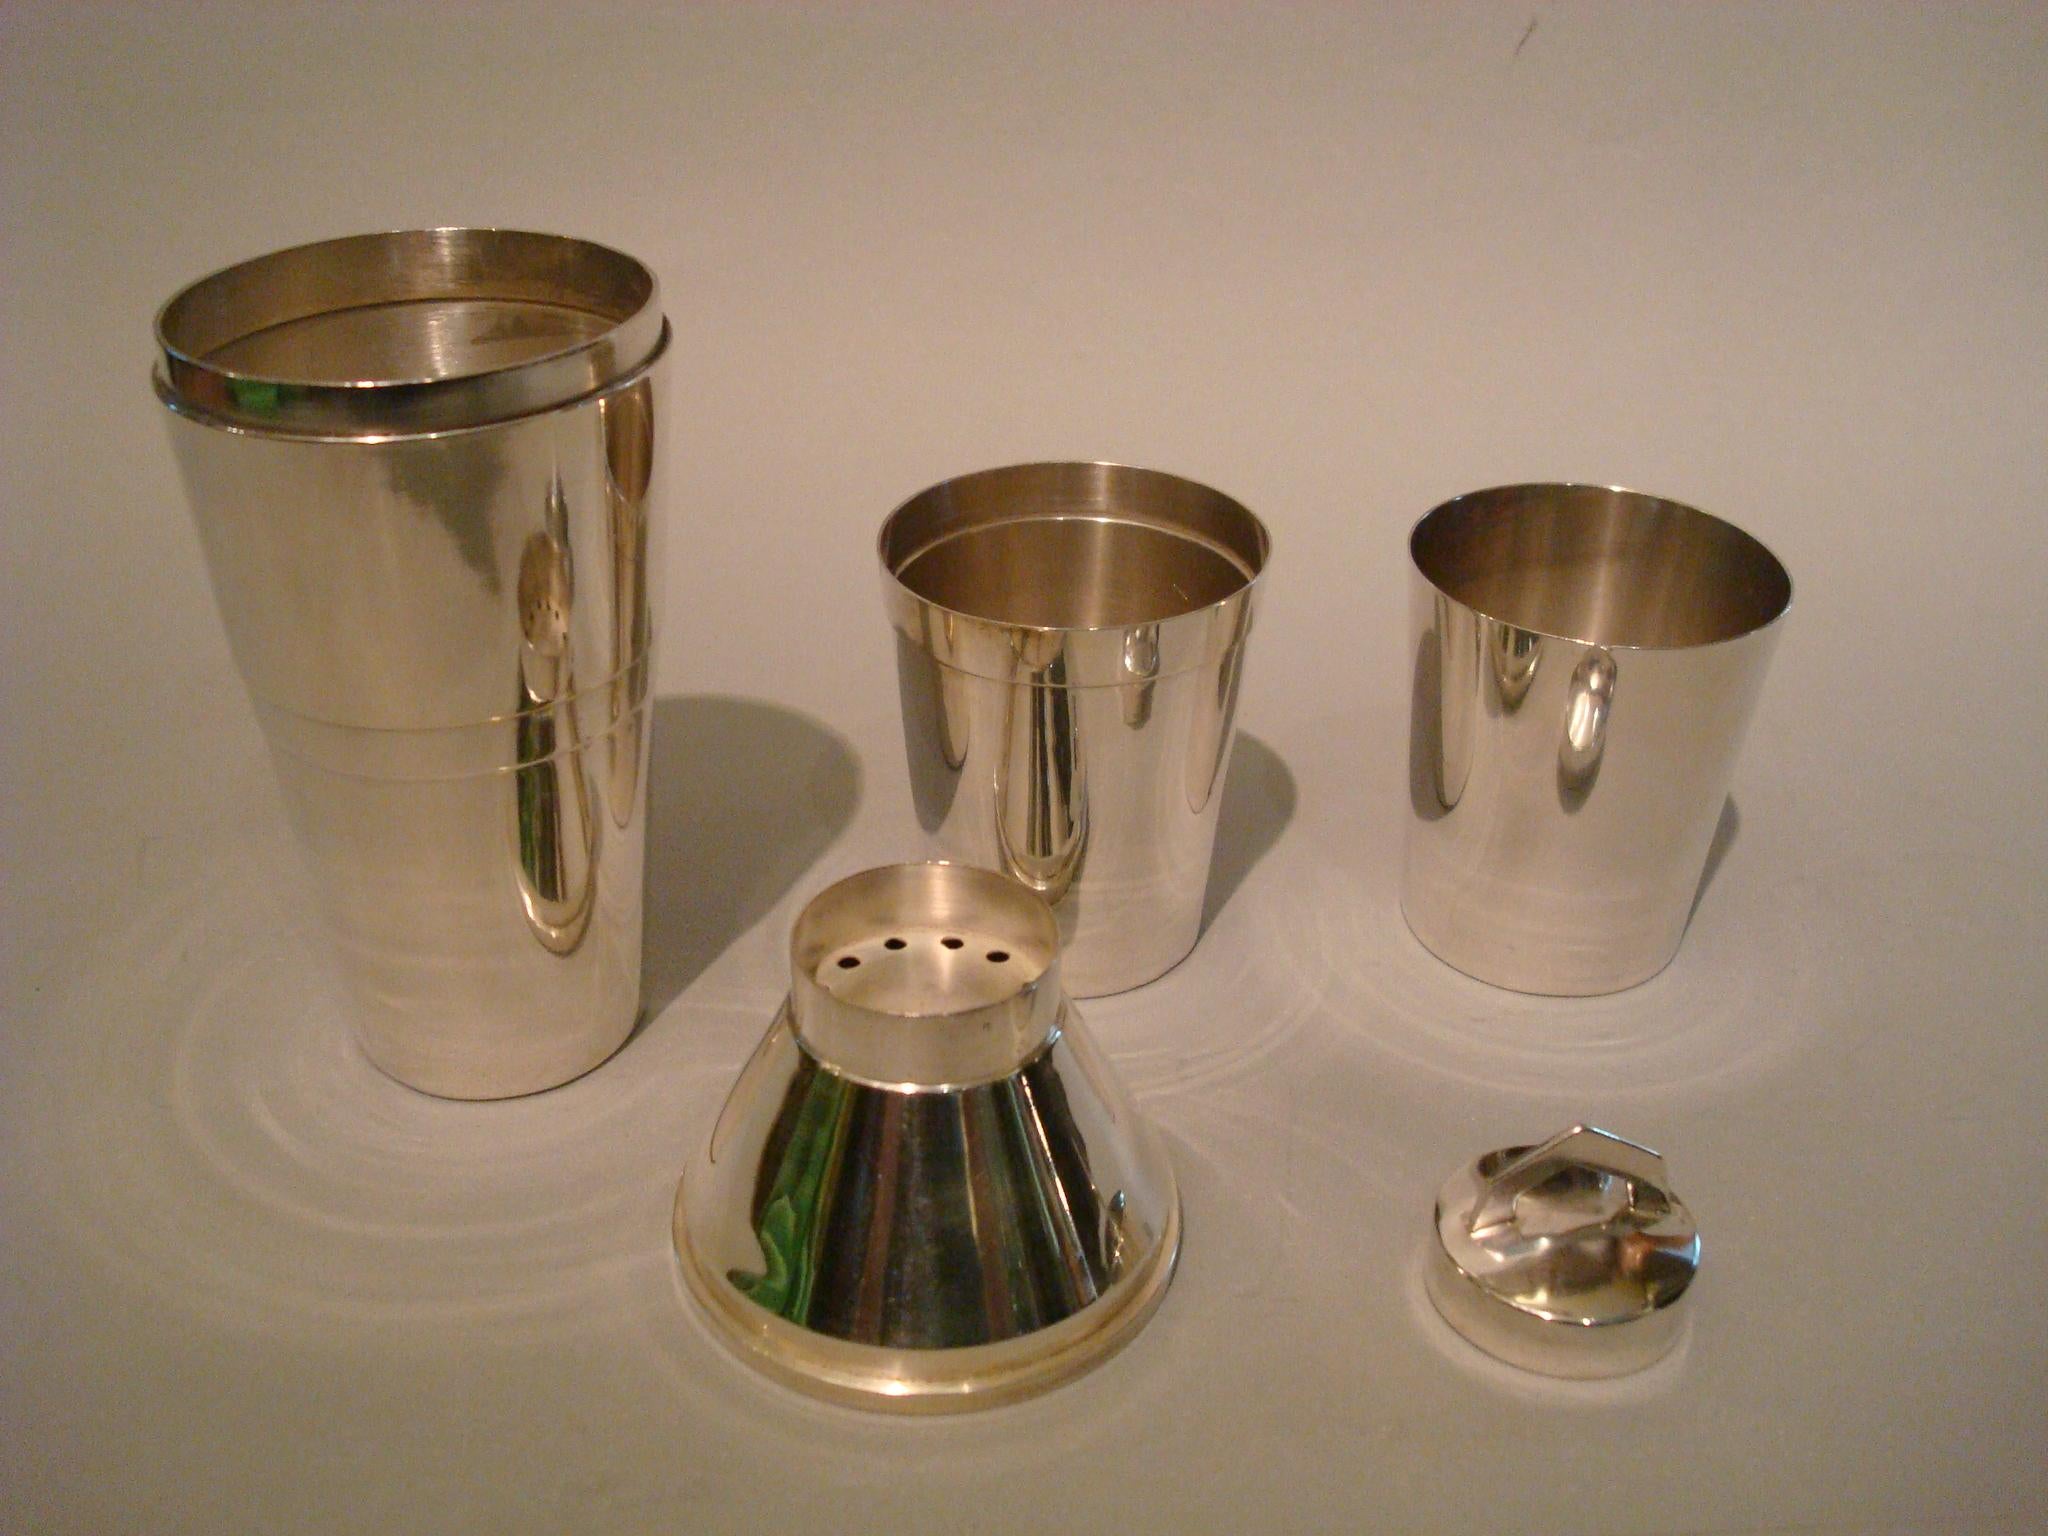 20th Century Art Deco Hermes Paris Travel Cocktail Shaker with two goblets, 1930, France